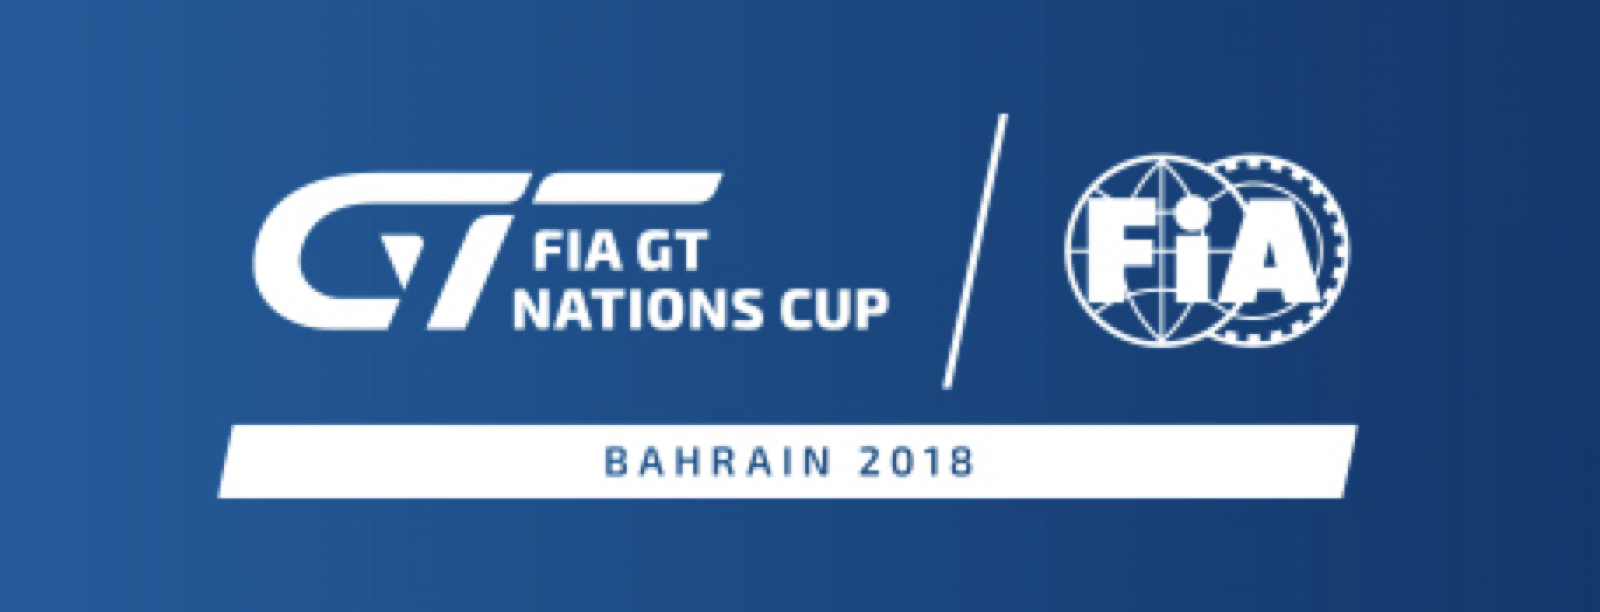 Interest grows in FIA GT Nations Cup